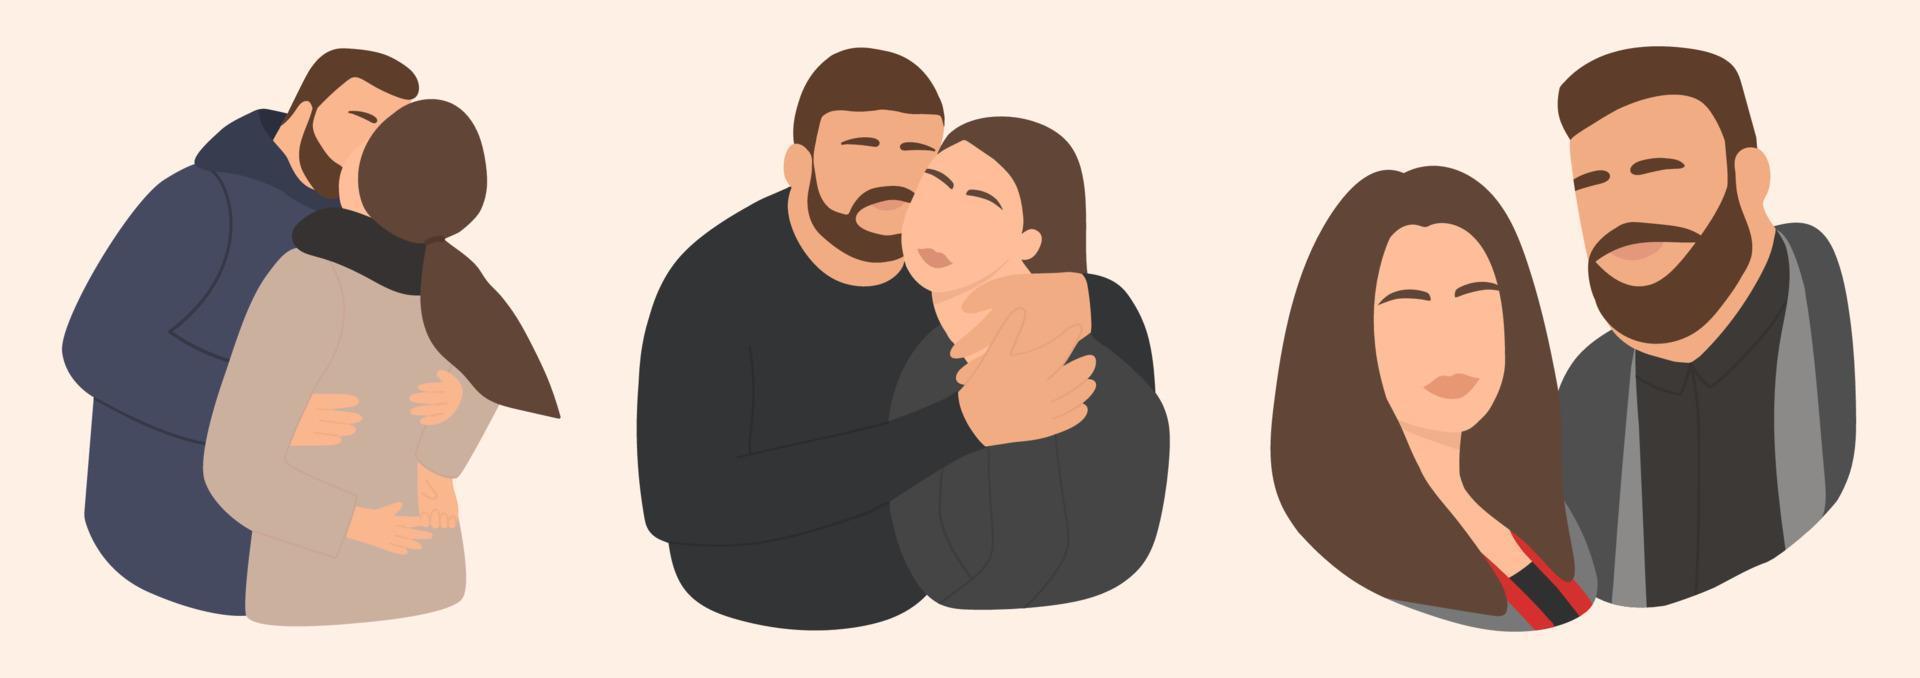 A set of stickers for a couple in love on an isolated neutral background vector